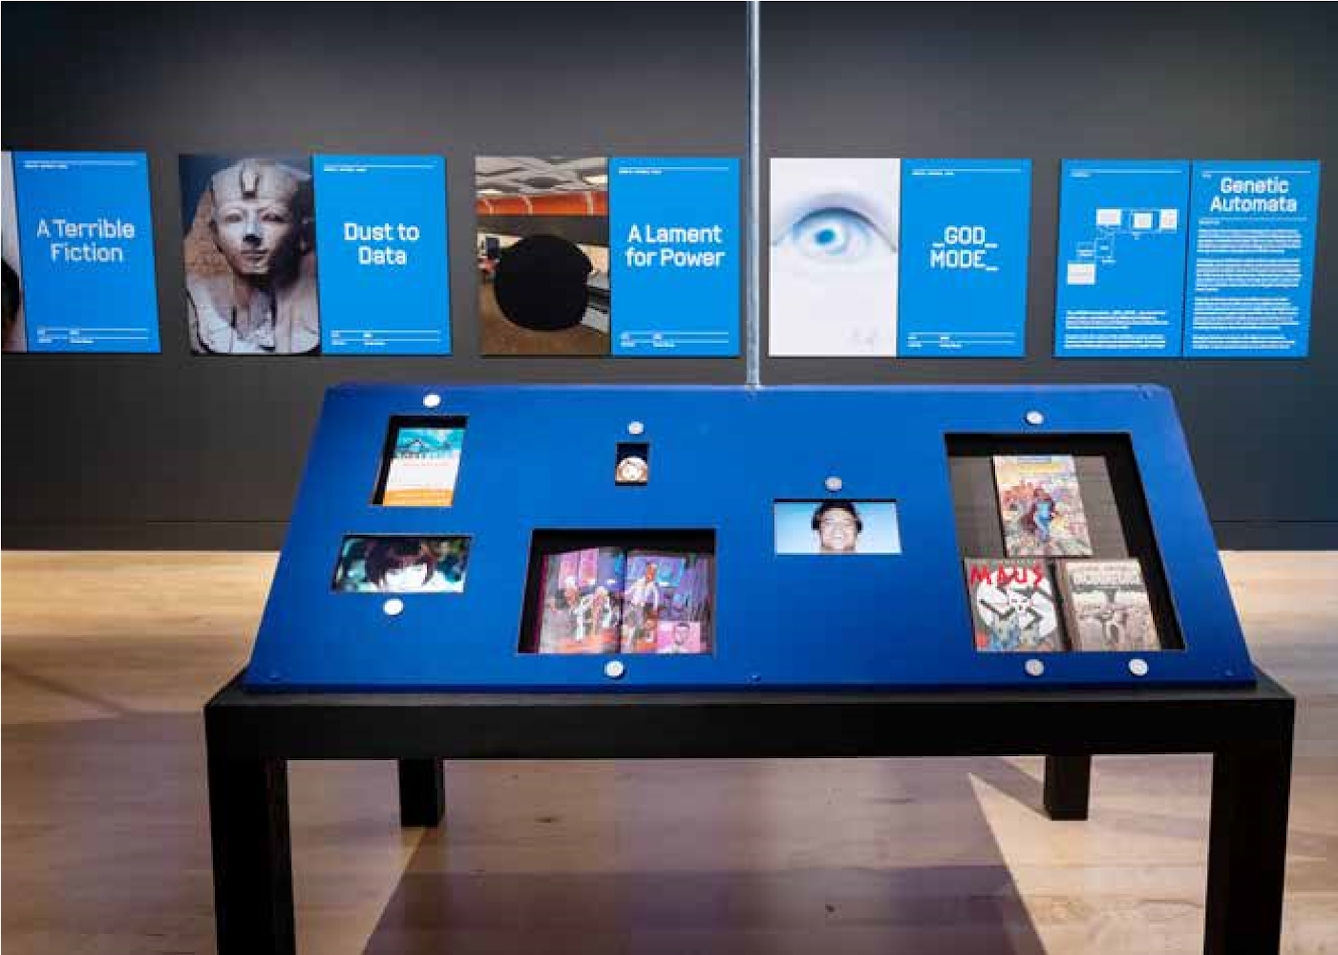 A display case in a museum exhibtion with a sloped blue top showing books, films and videogames.